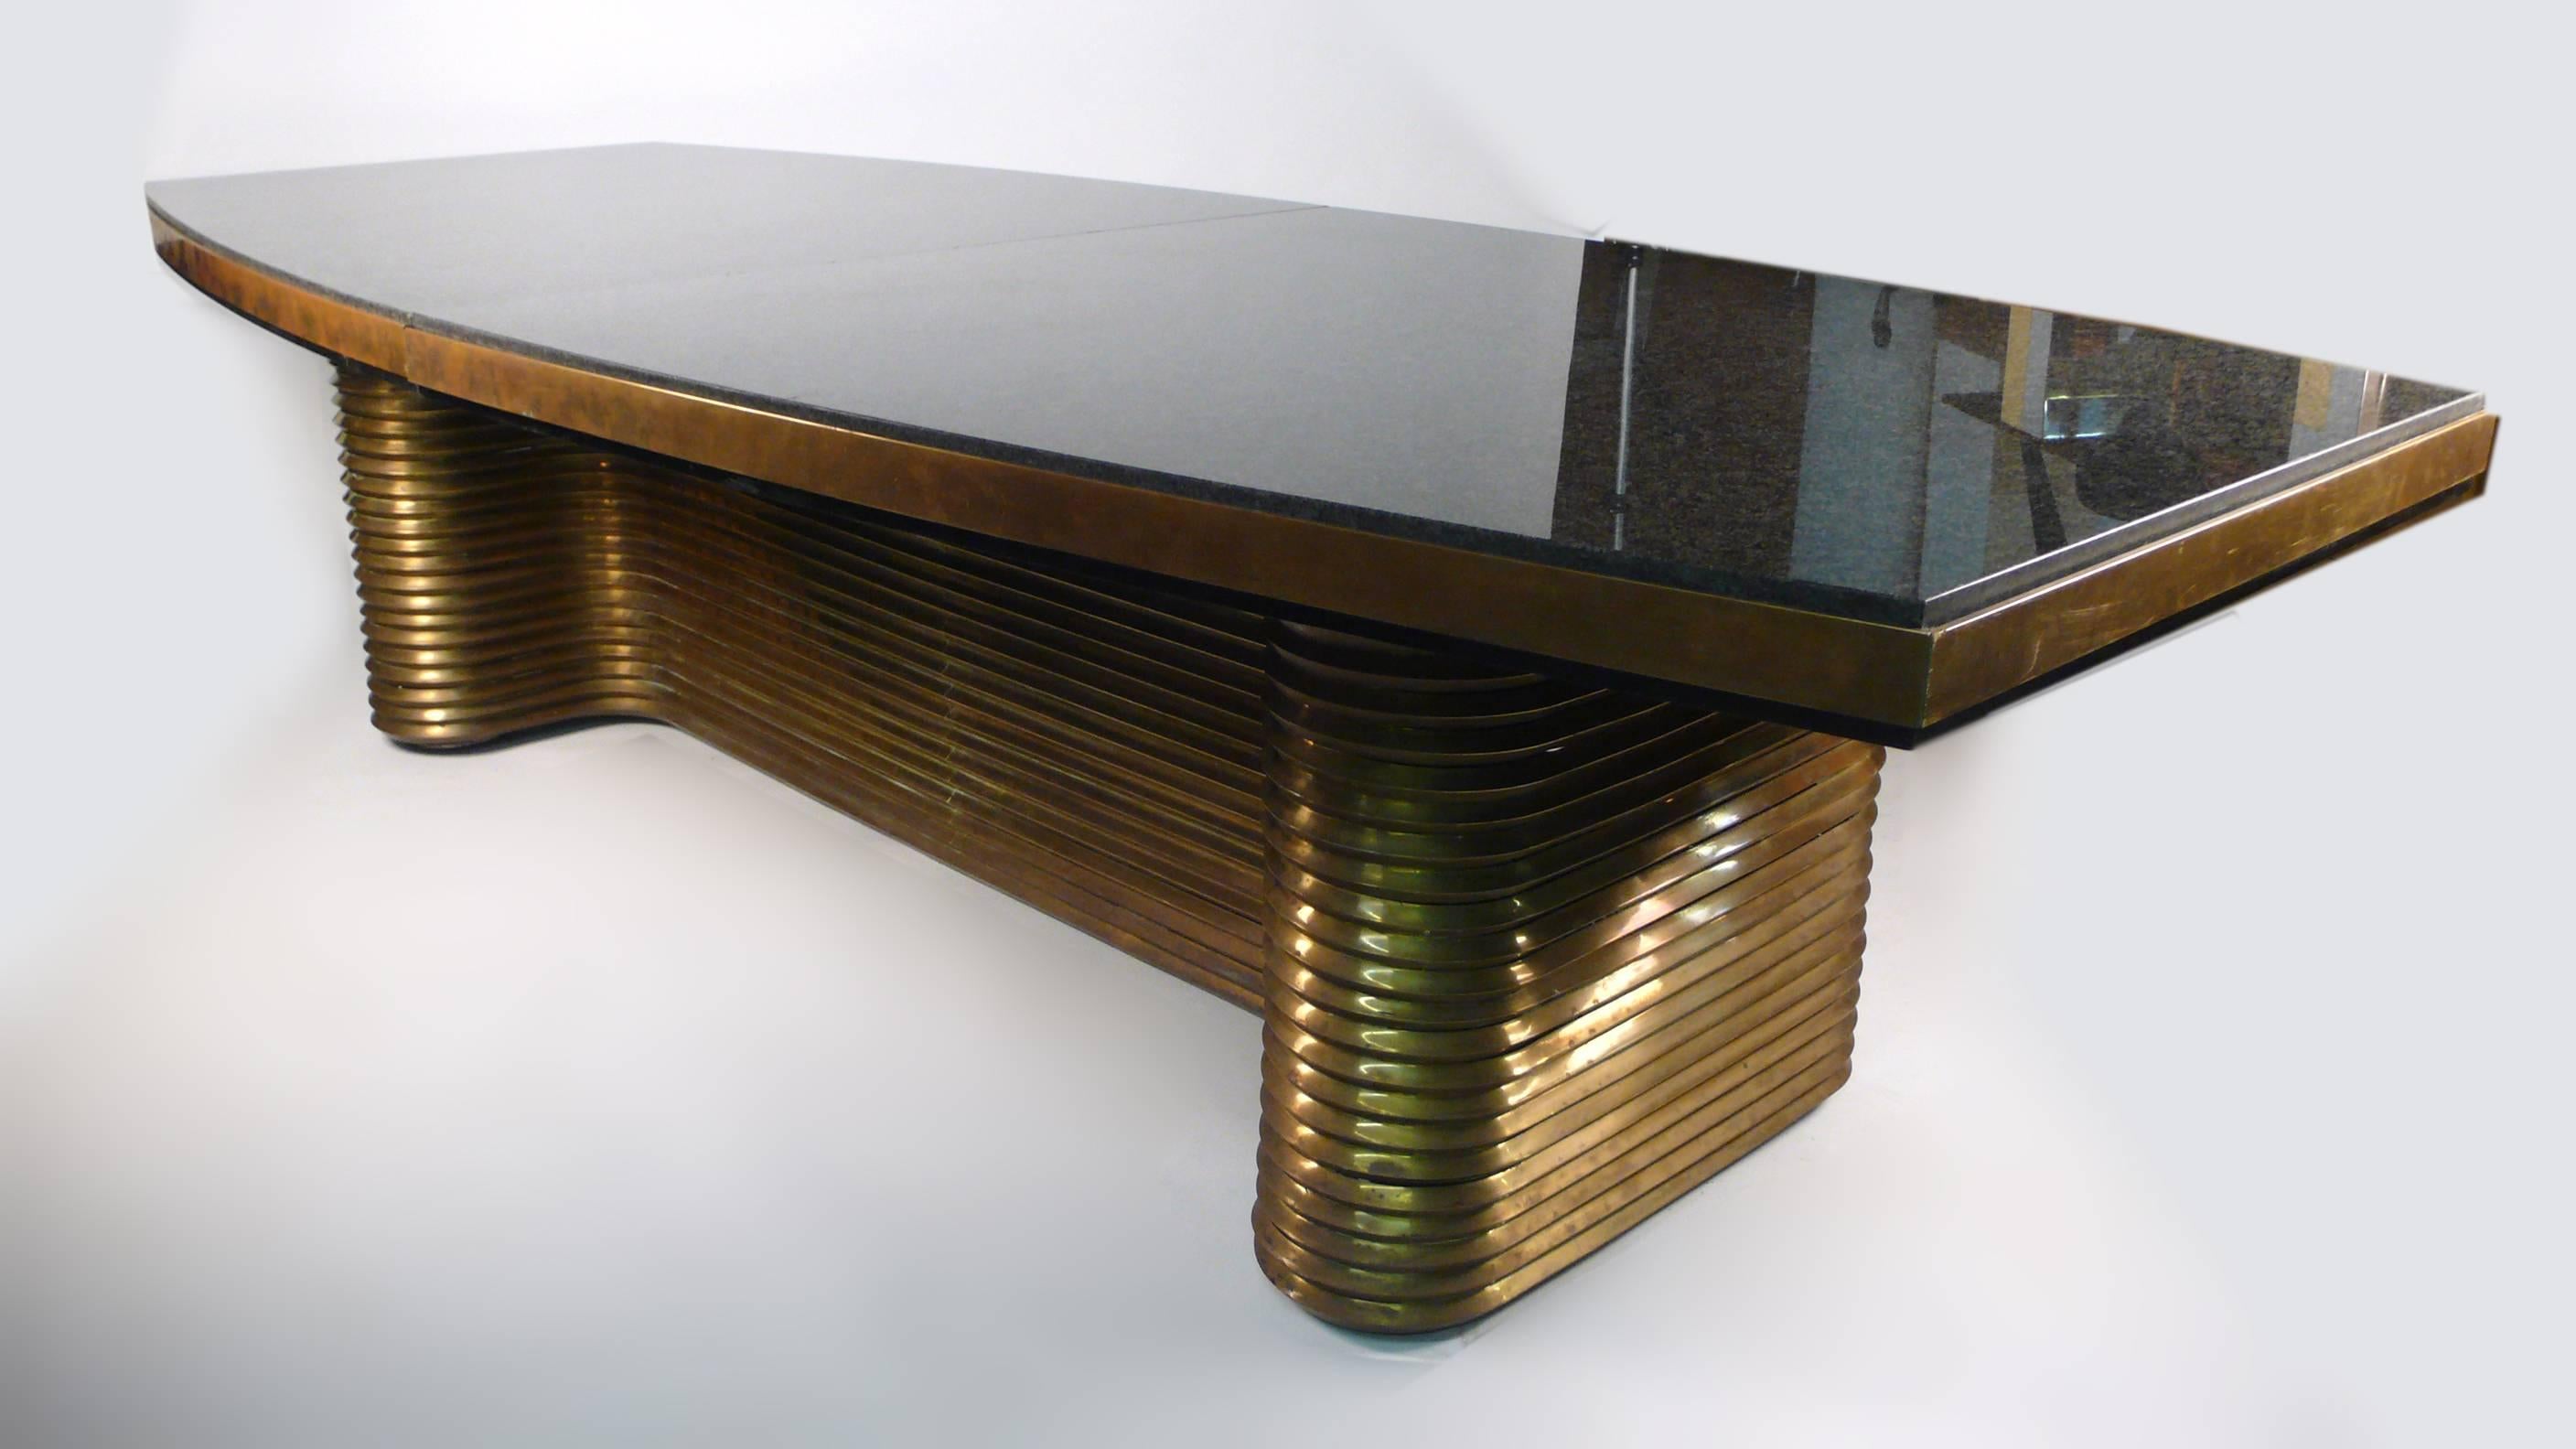 Limited edition dining table designed by Edward Moore and hand forged in his studio in Quebec. The base is crafted from extruded architectural bronze and the top from two slabs of polished black granite. This is an exqisite table for the discerning